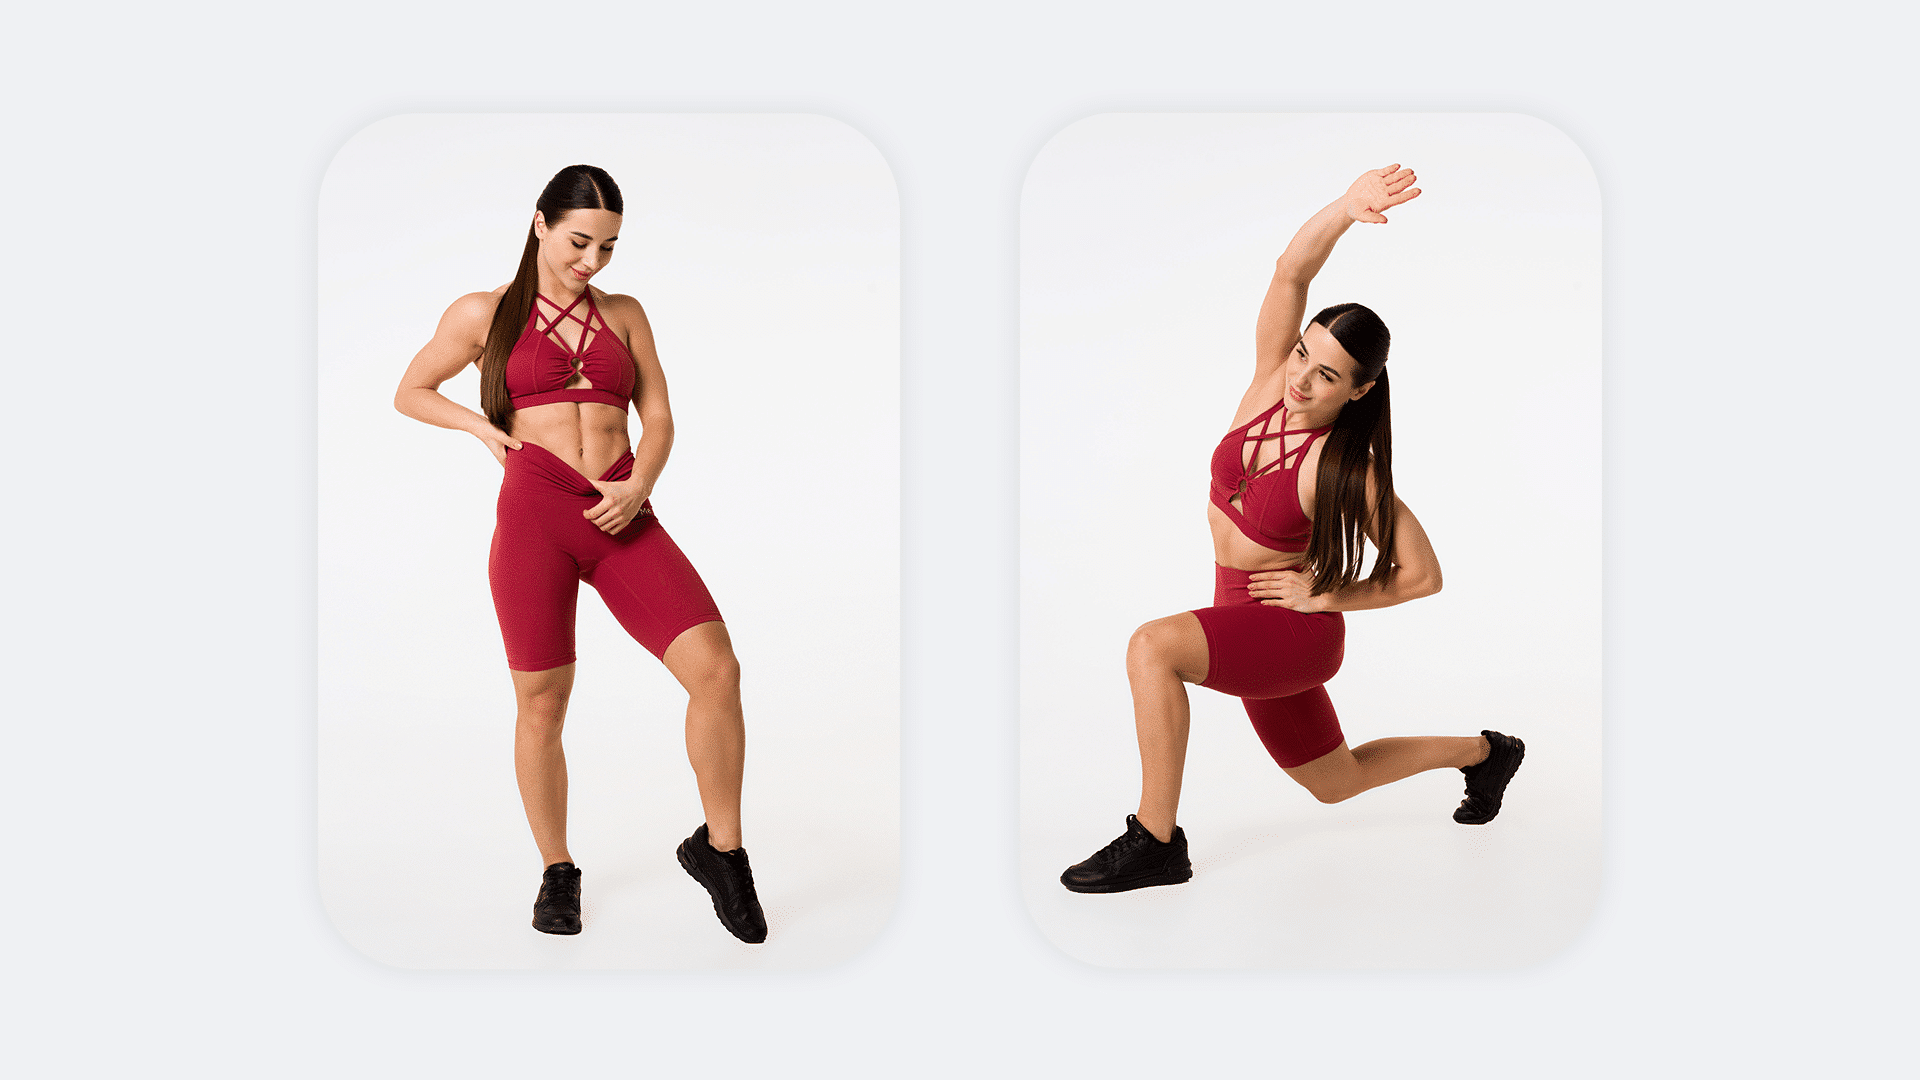 I TRIED WALL PILATES WORKOUTS FOR A WEEK